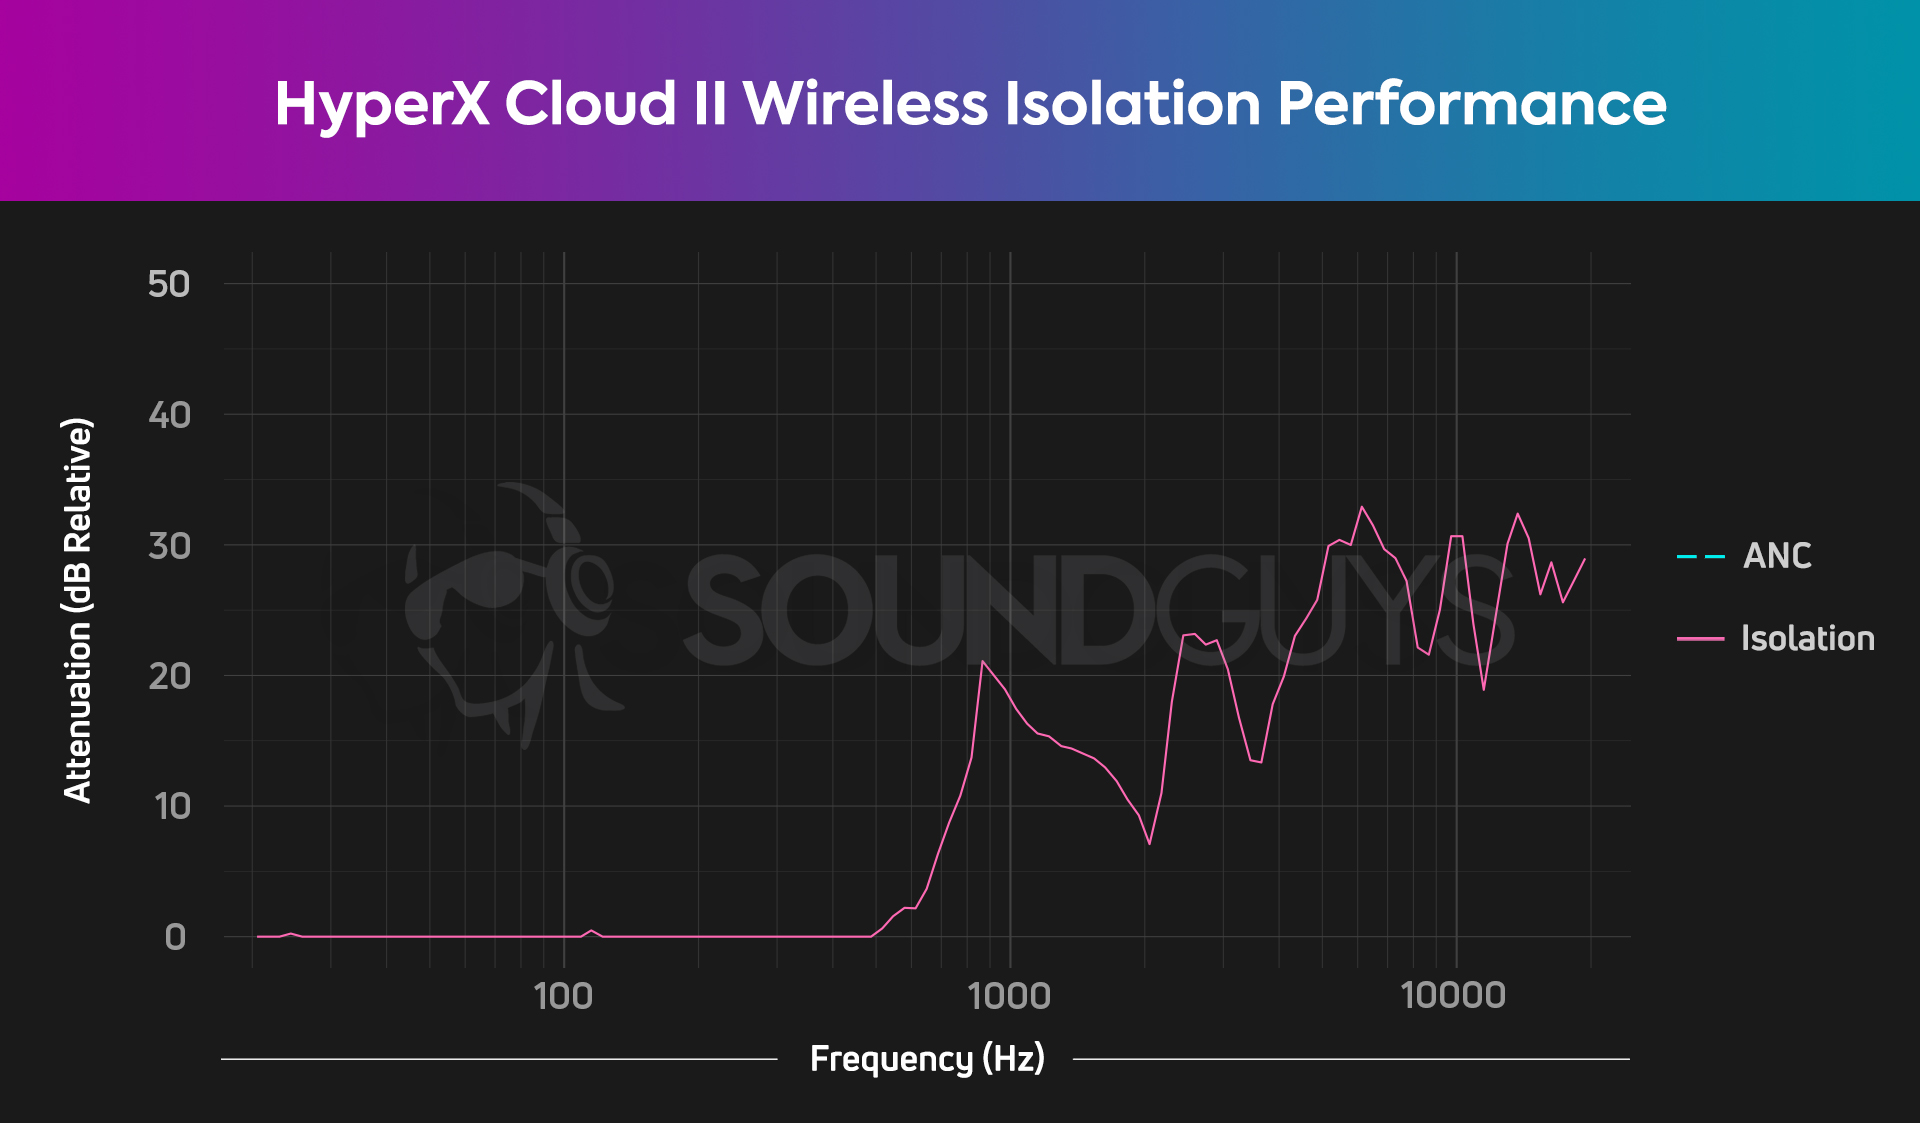 An isolation chart for the HyperX Cloud II Wireless gaming headset, which offers pretty mediocre isolation preformance.